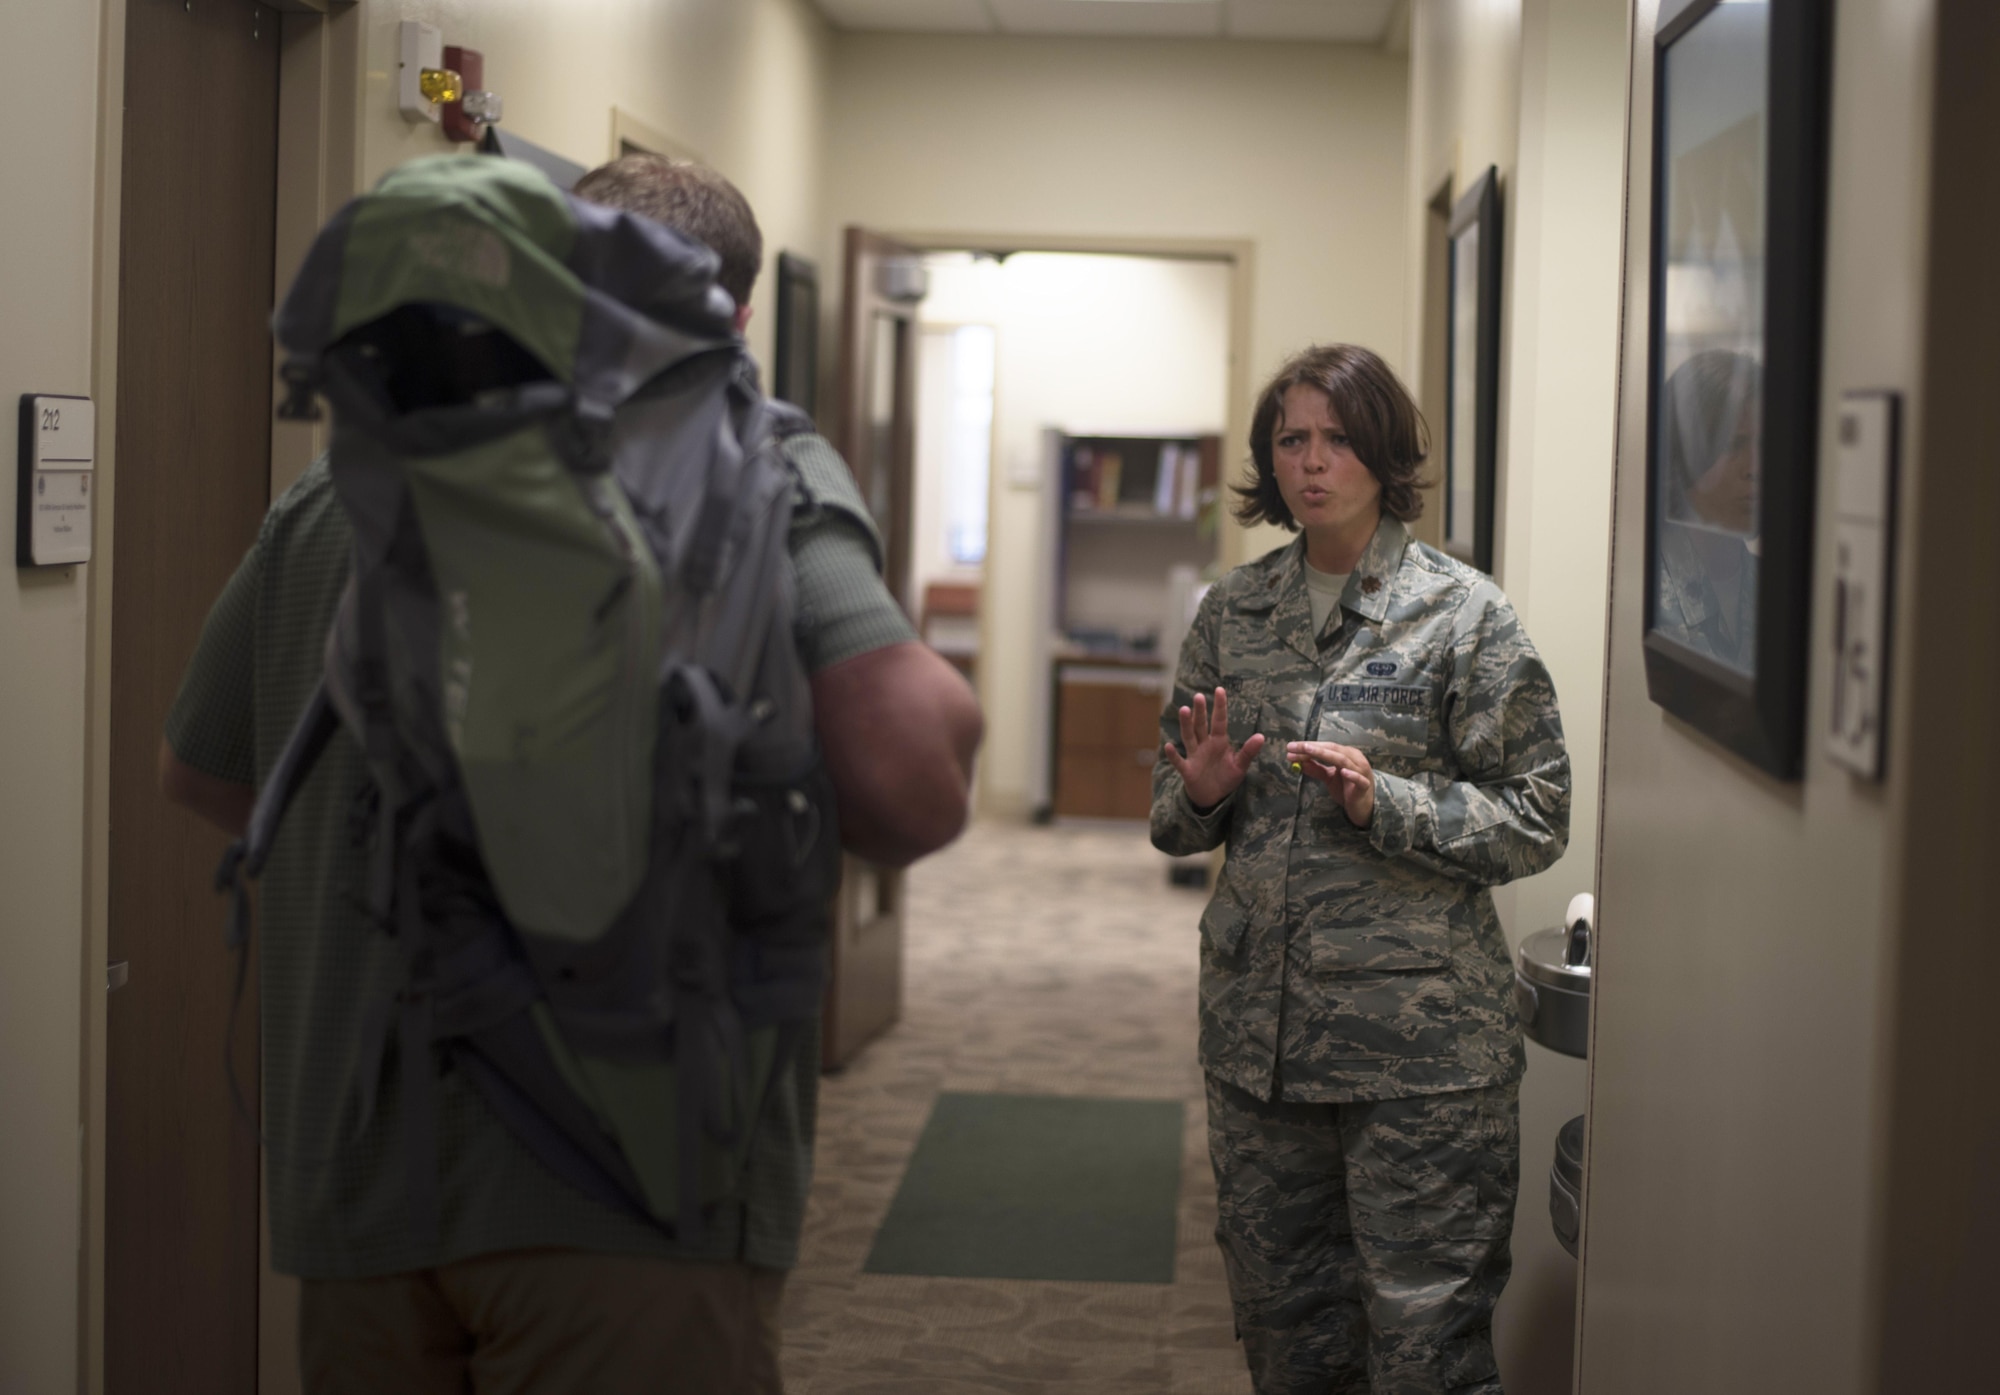 U.S. Air Force Maj. Taya Castro, an executive officer assigned to the 927th Air Refueling Wing, attempts to reconcile with an armed gunman during an active shooter exercise at MacDill Air Force Base, Fla., April 17, 2017. The exercise was created to test the speed of emergency response teams on MacDill. (U.S. Air Force photo by Airman 1st Class Adam R. Shanks)